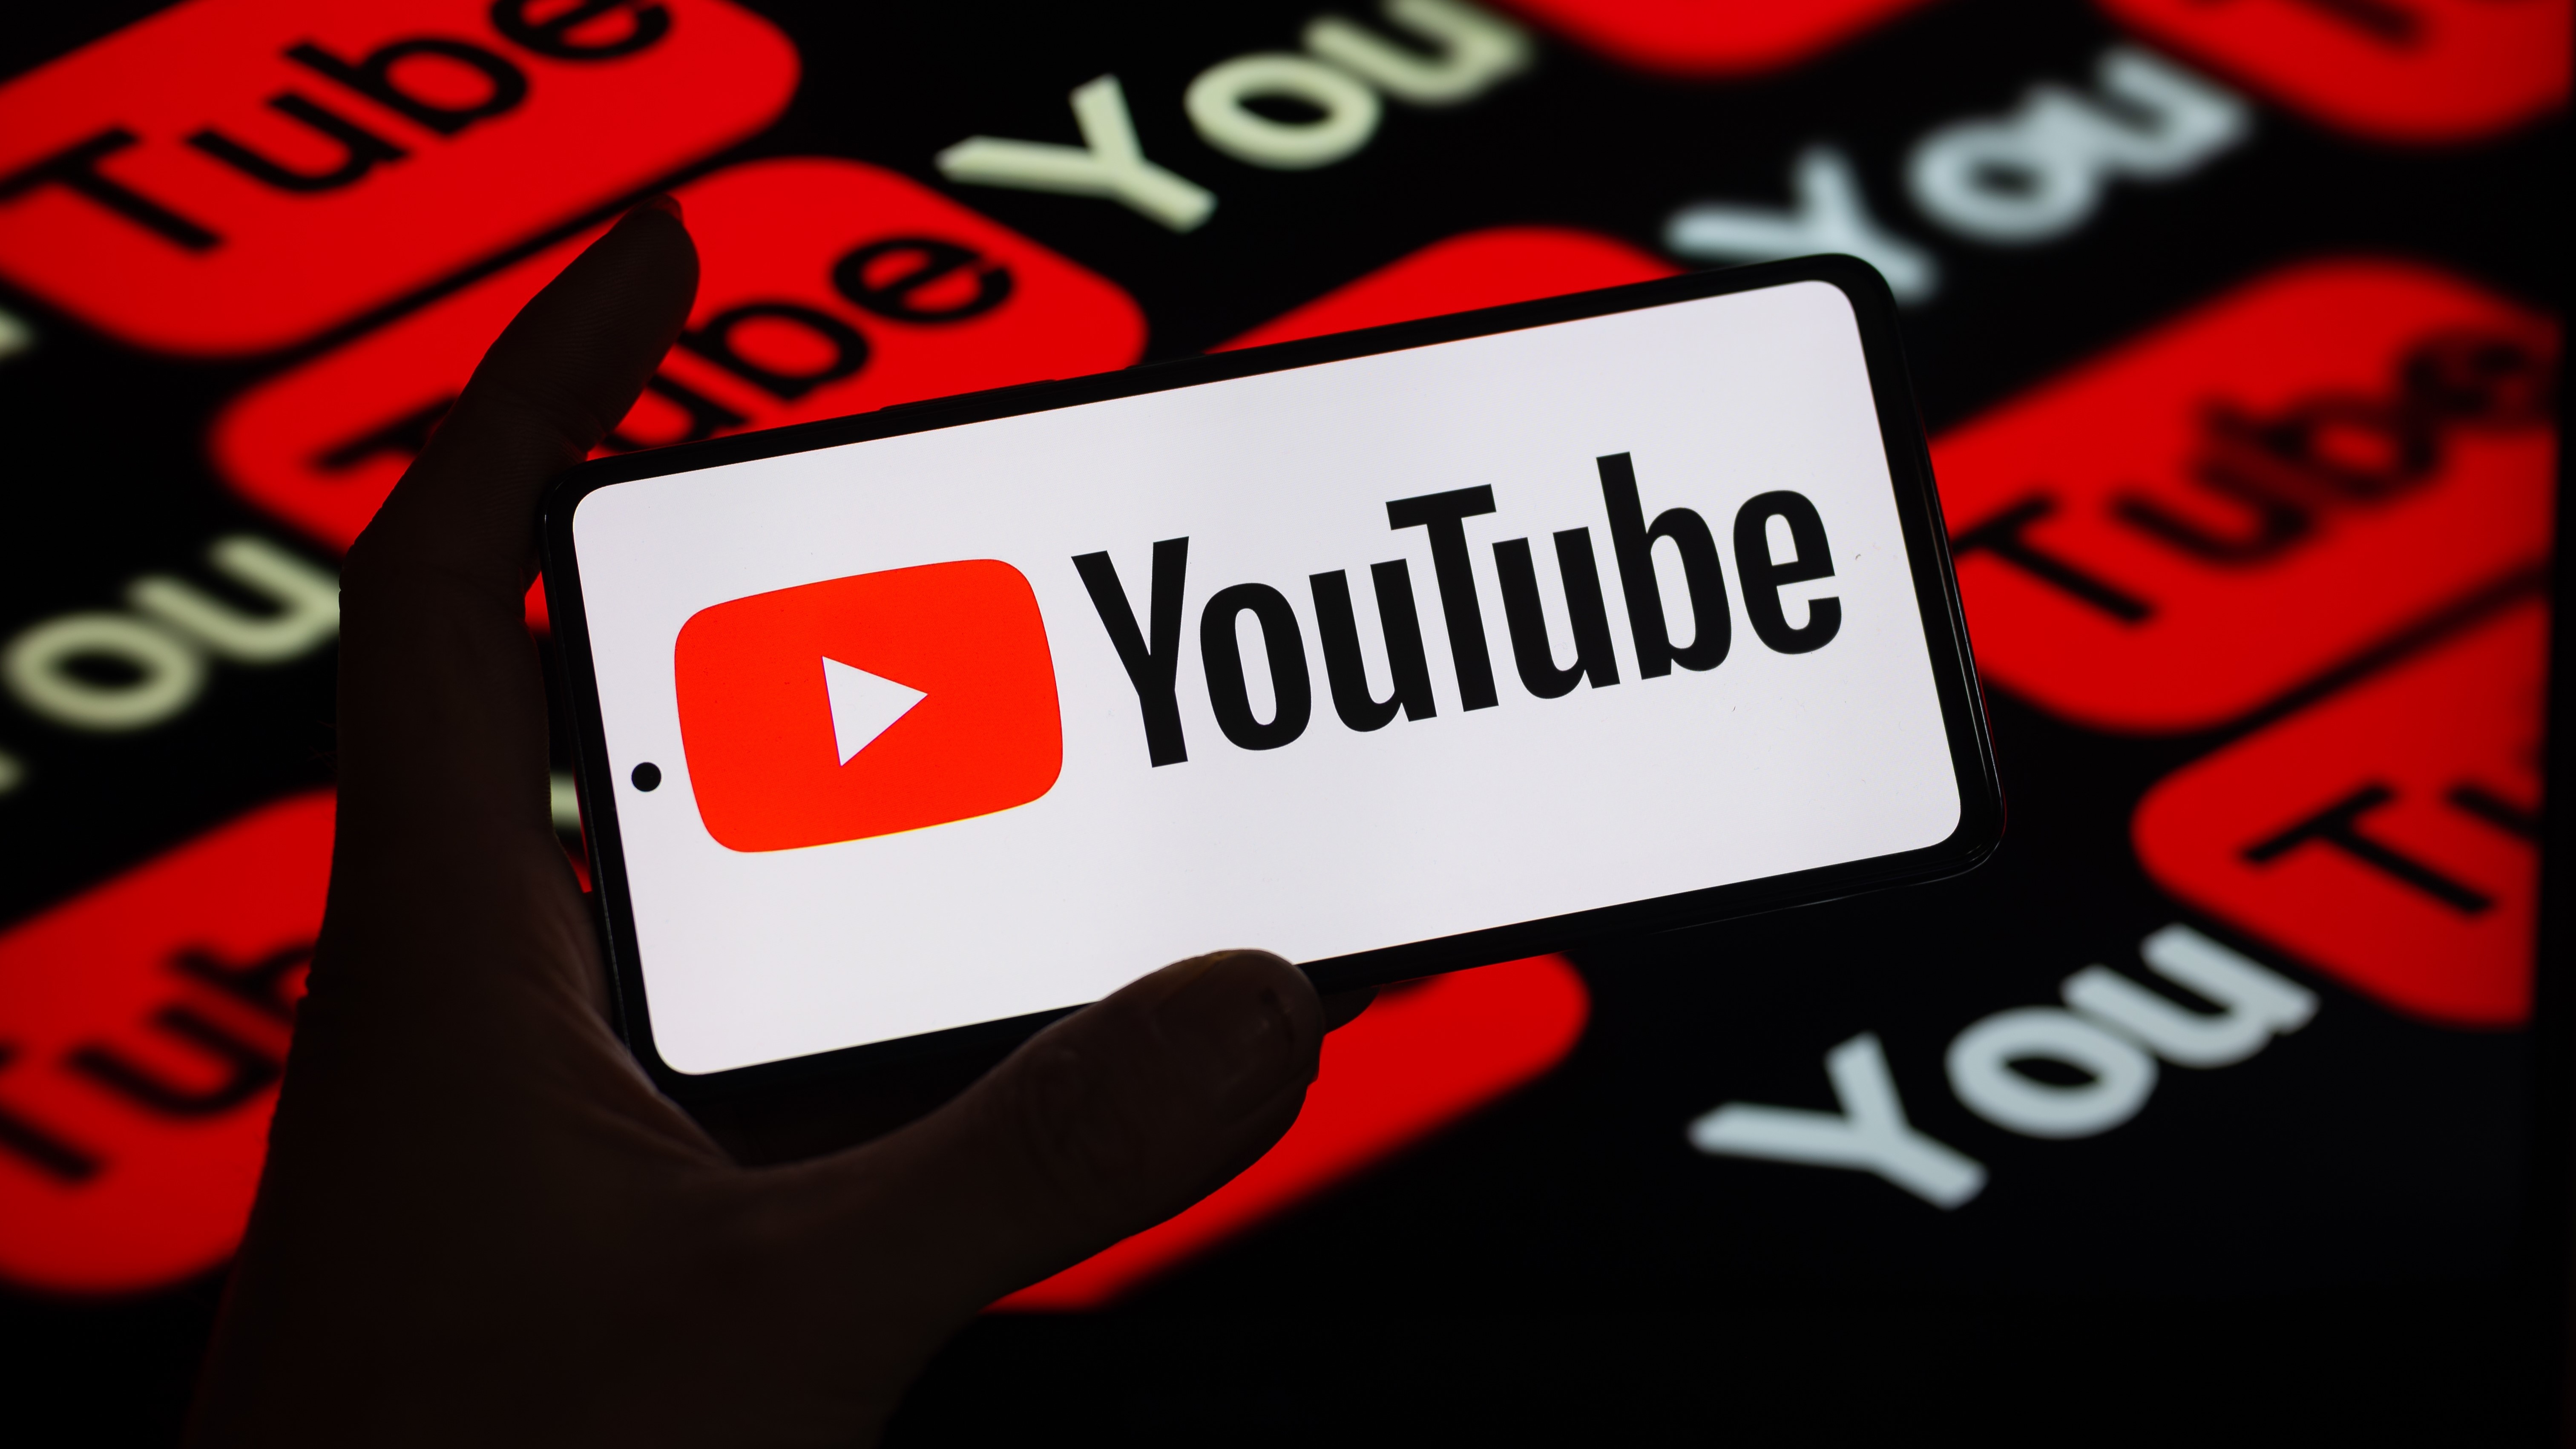 YouTube is reportedly canceling Premium memberships for people using VPNs to get discounts